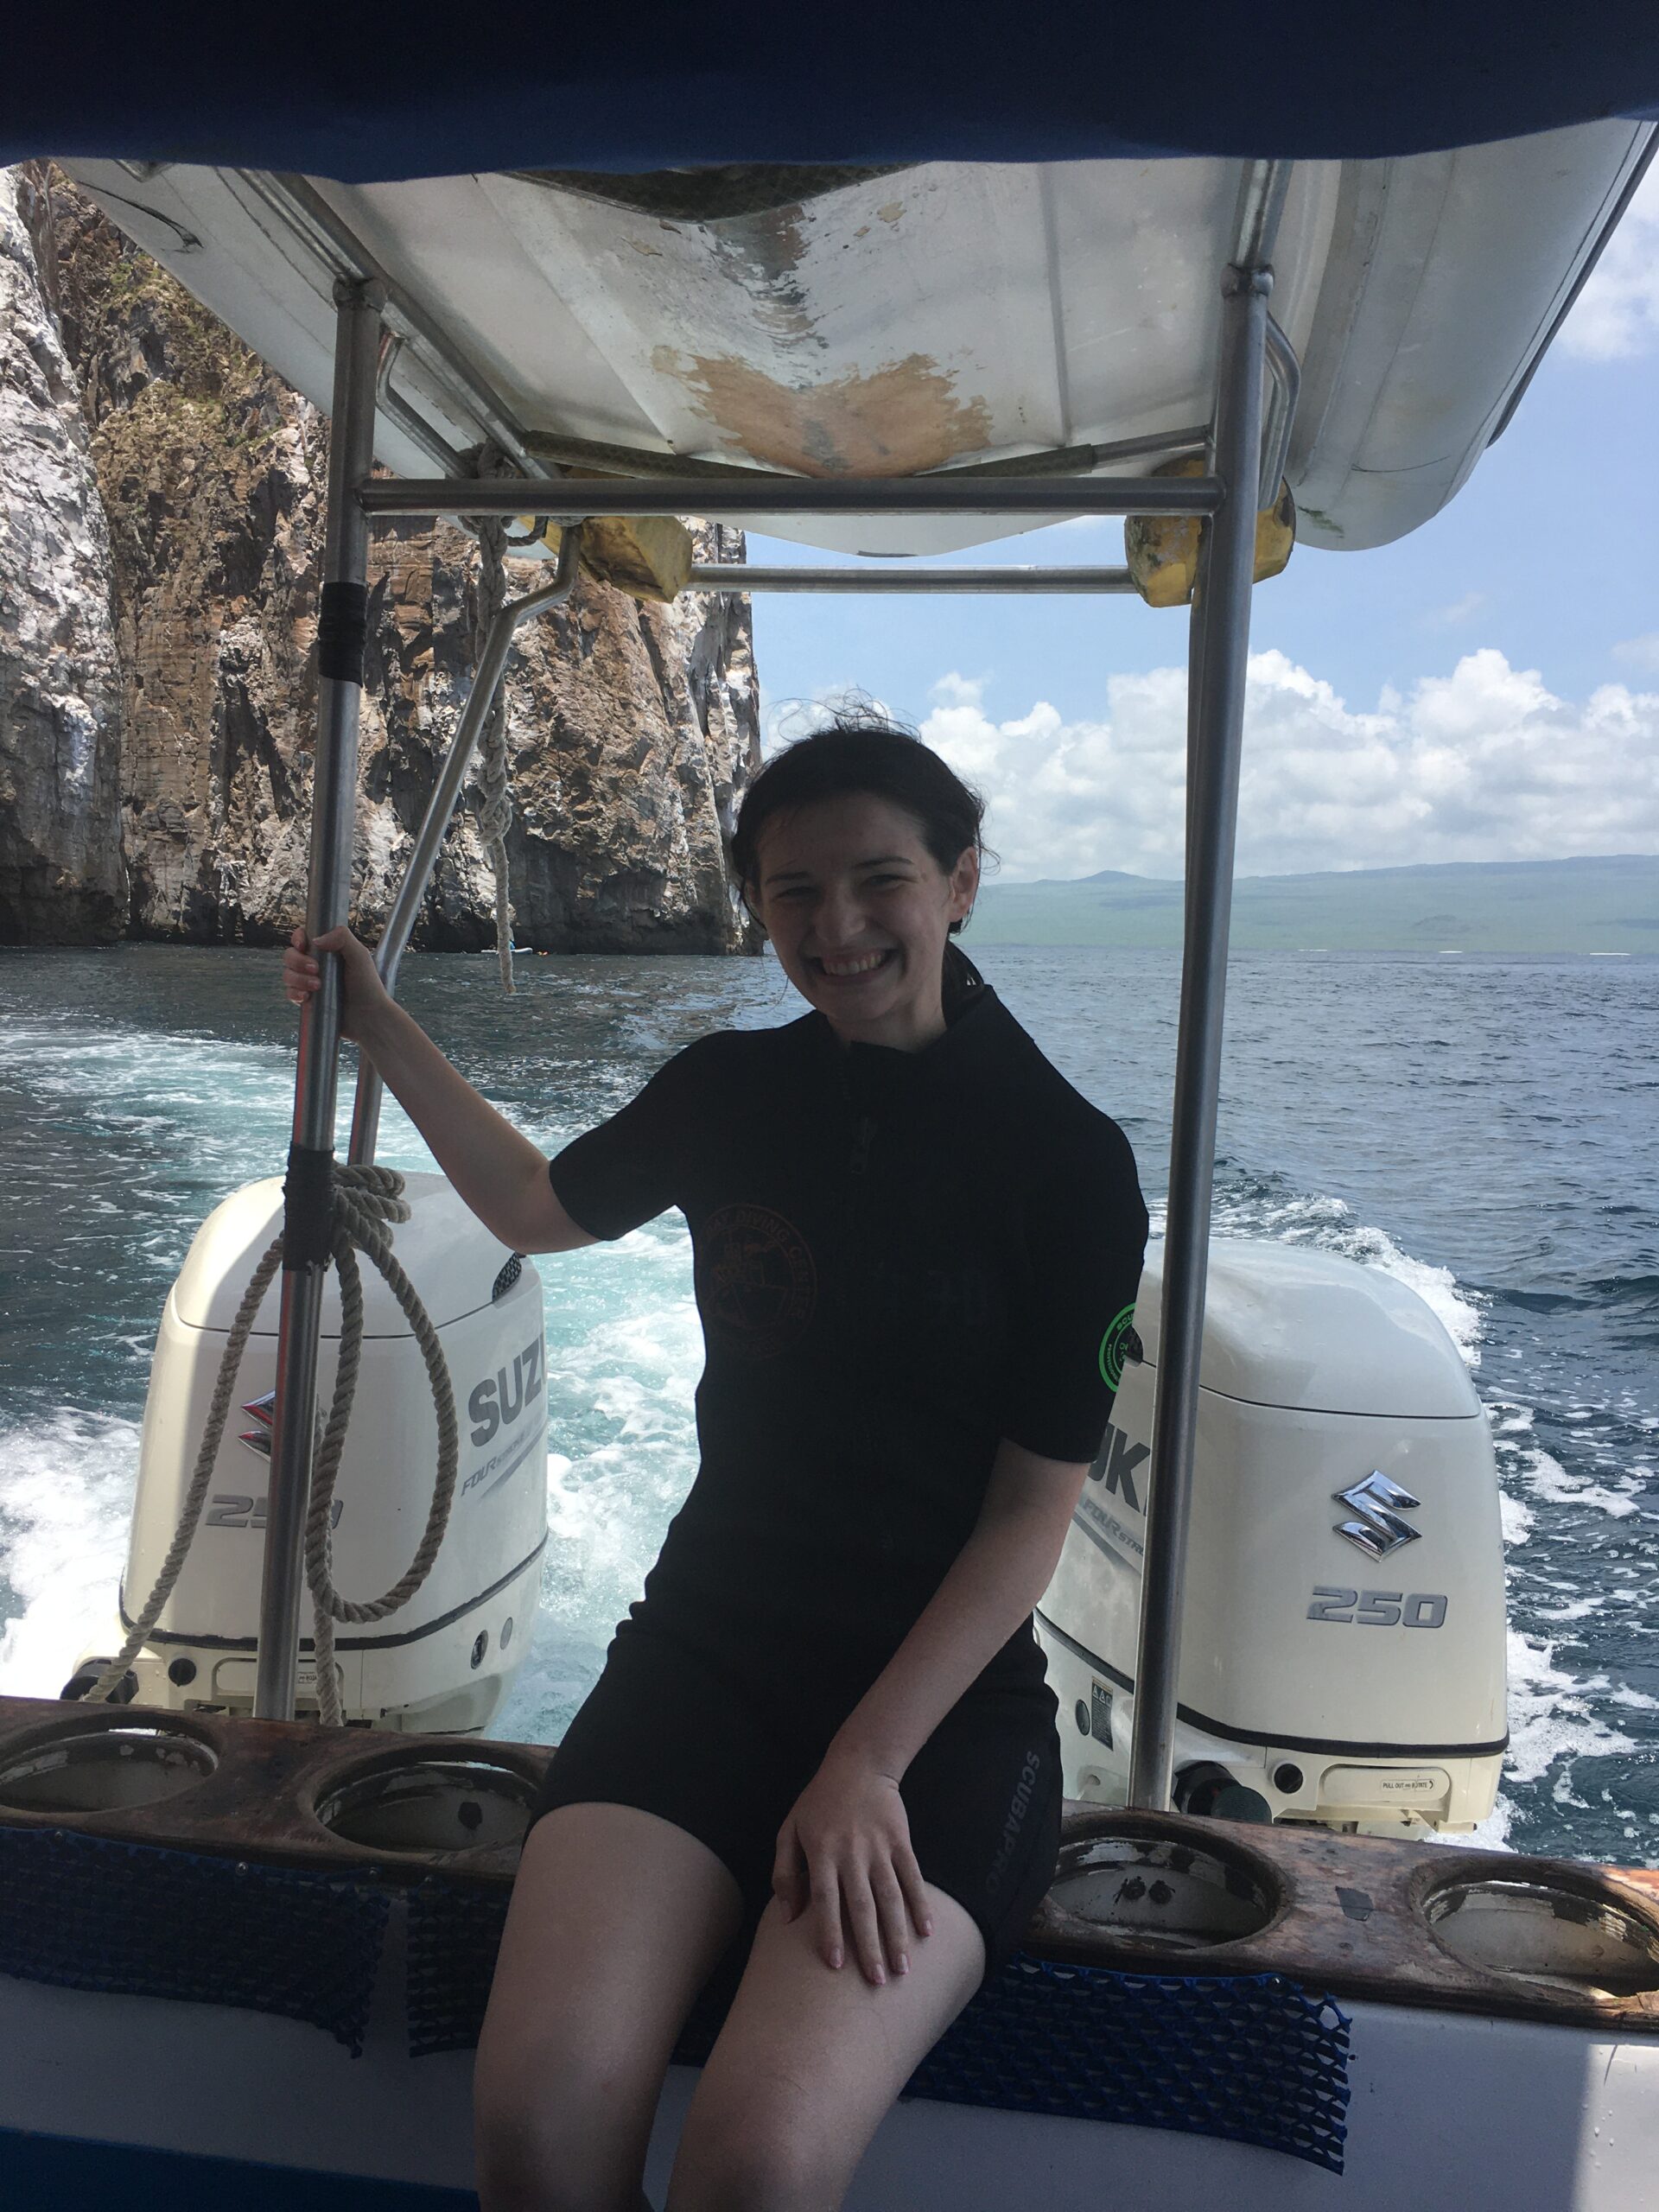 Pictured is me in a boat next to Kicker Rock. In the photo, I am wearing a wet suit, as I had just got snorkeling next to Kicker Rock. 